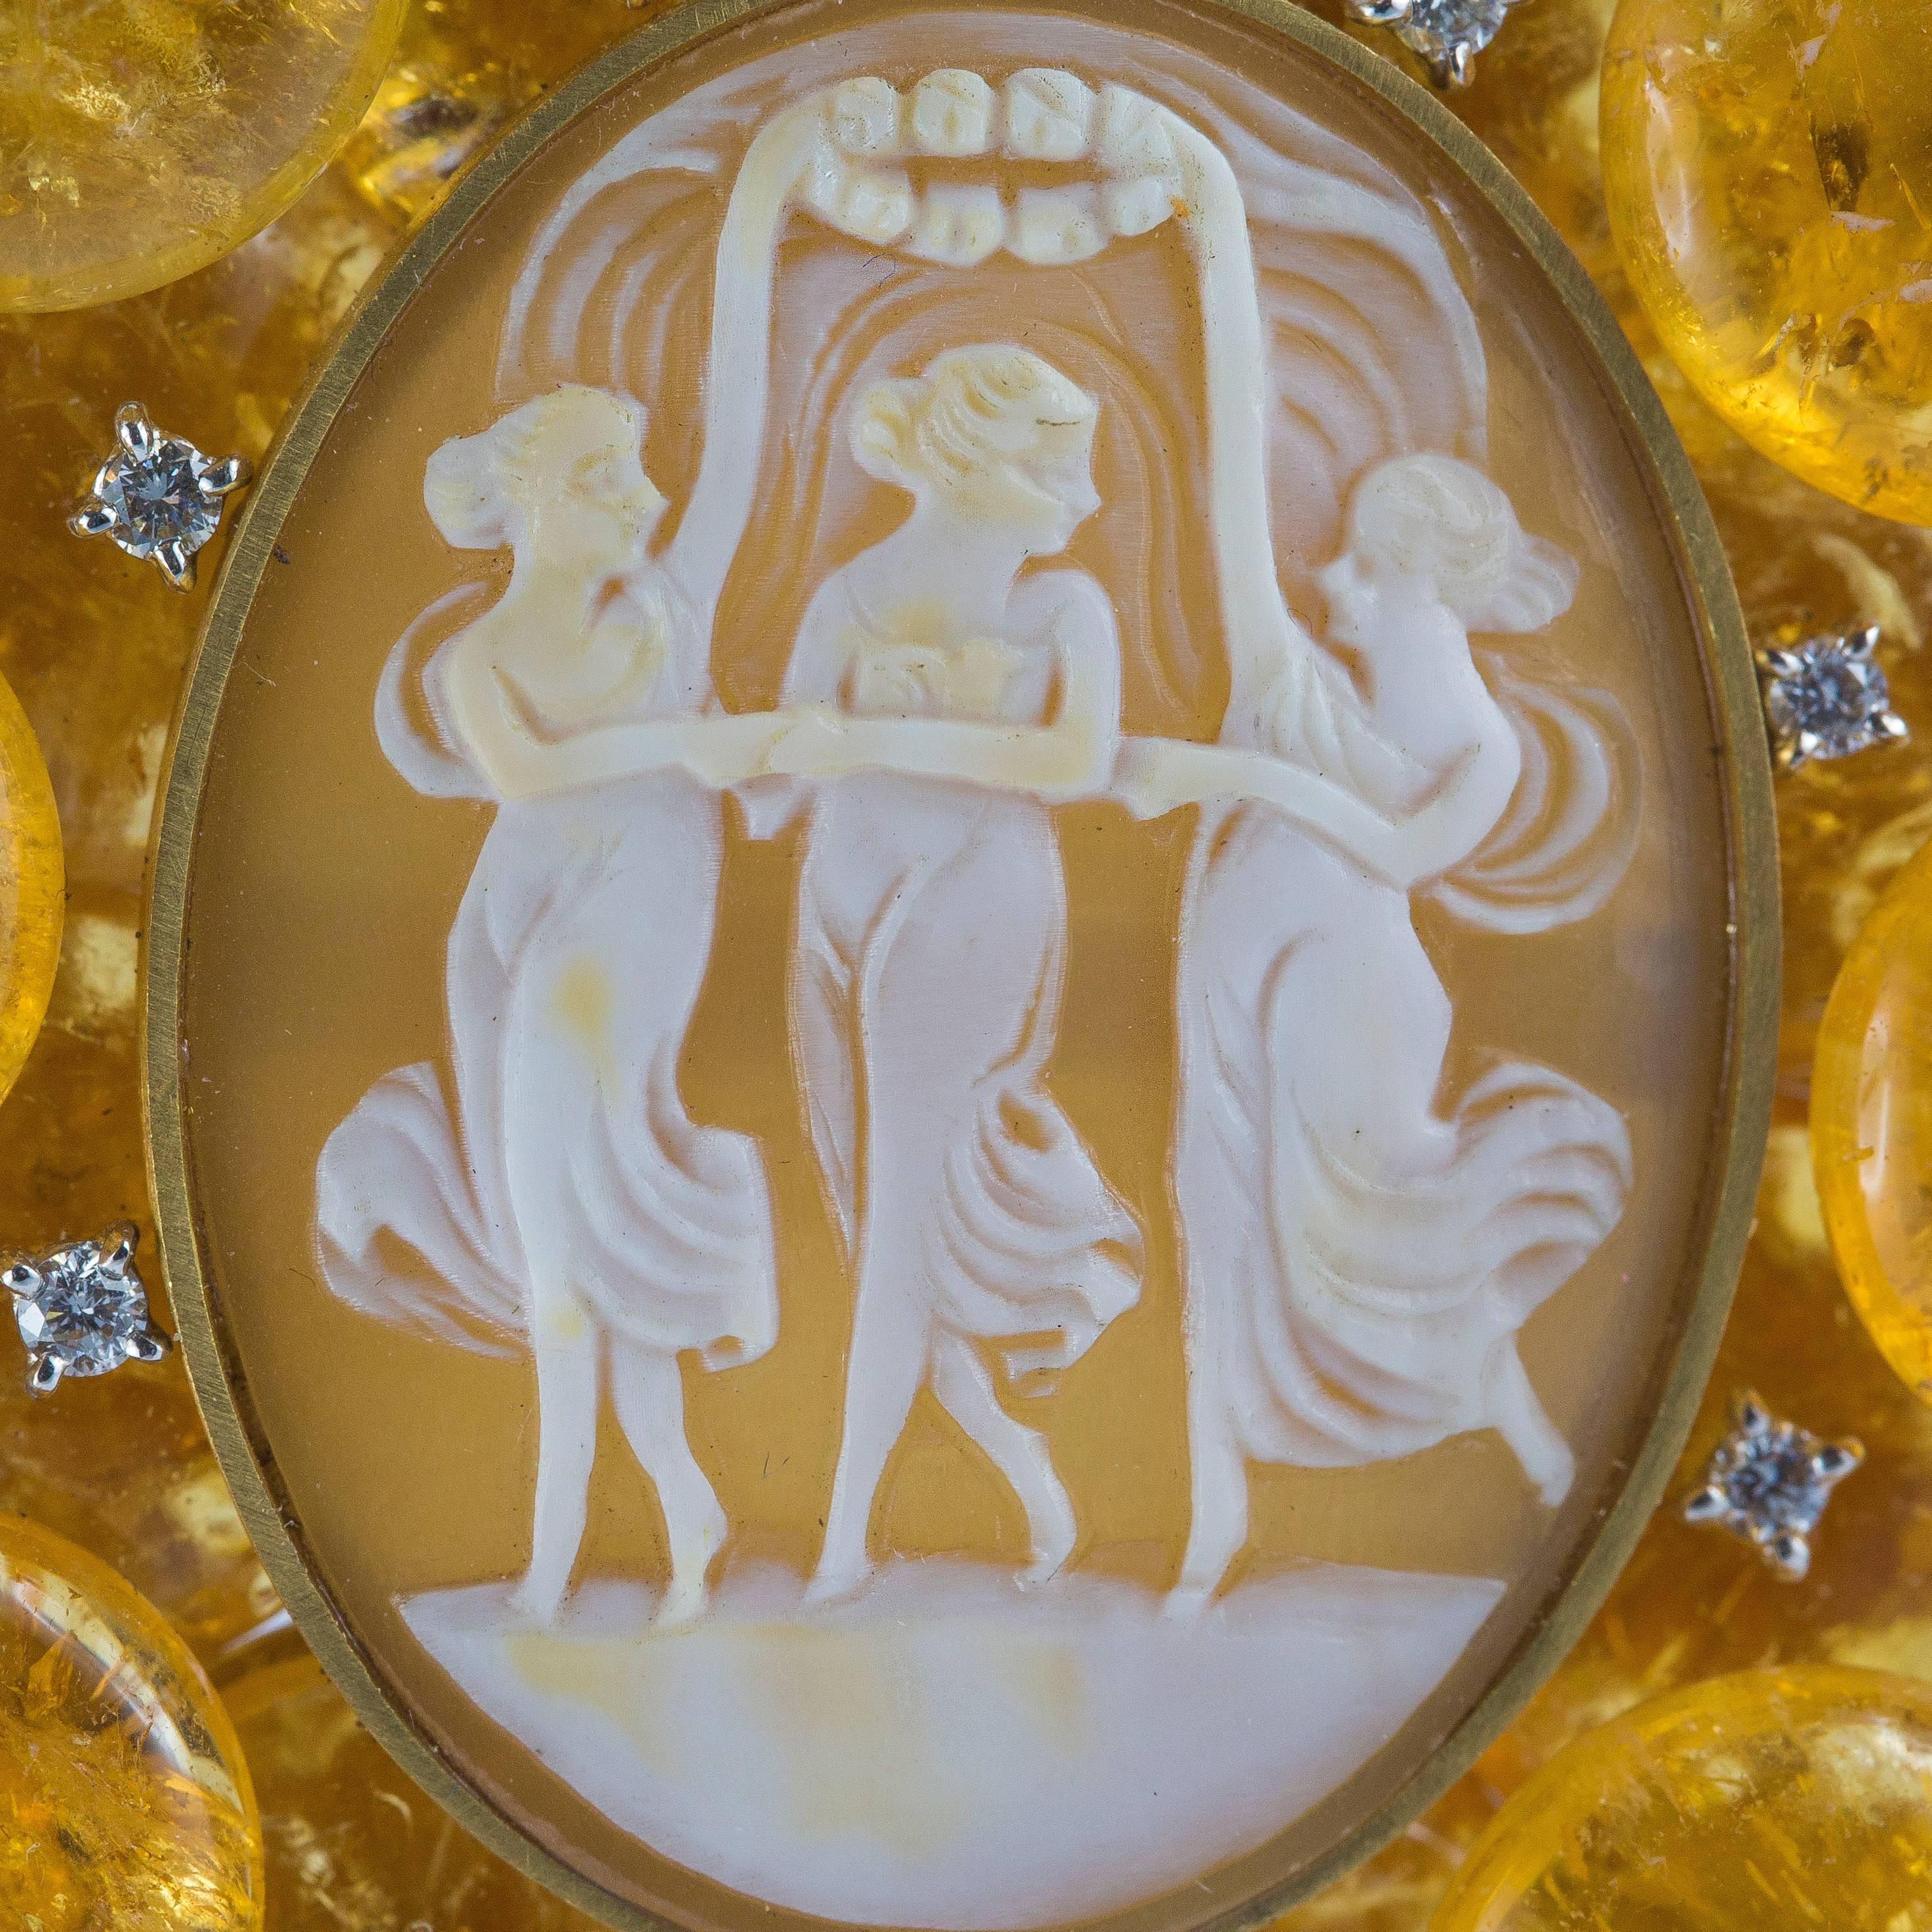 18 Karat yellow gold pendant with a beautiful cameo on conch shell depicting three graces and a circle motif citrine quartz outline with 0,45 ct. of brilliant cut diamond details.